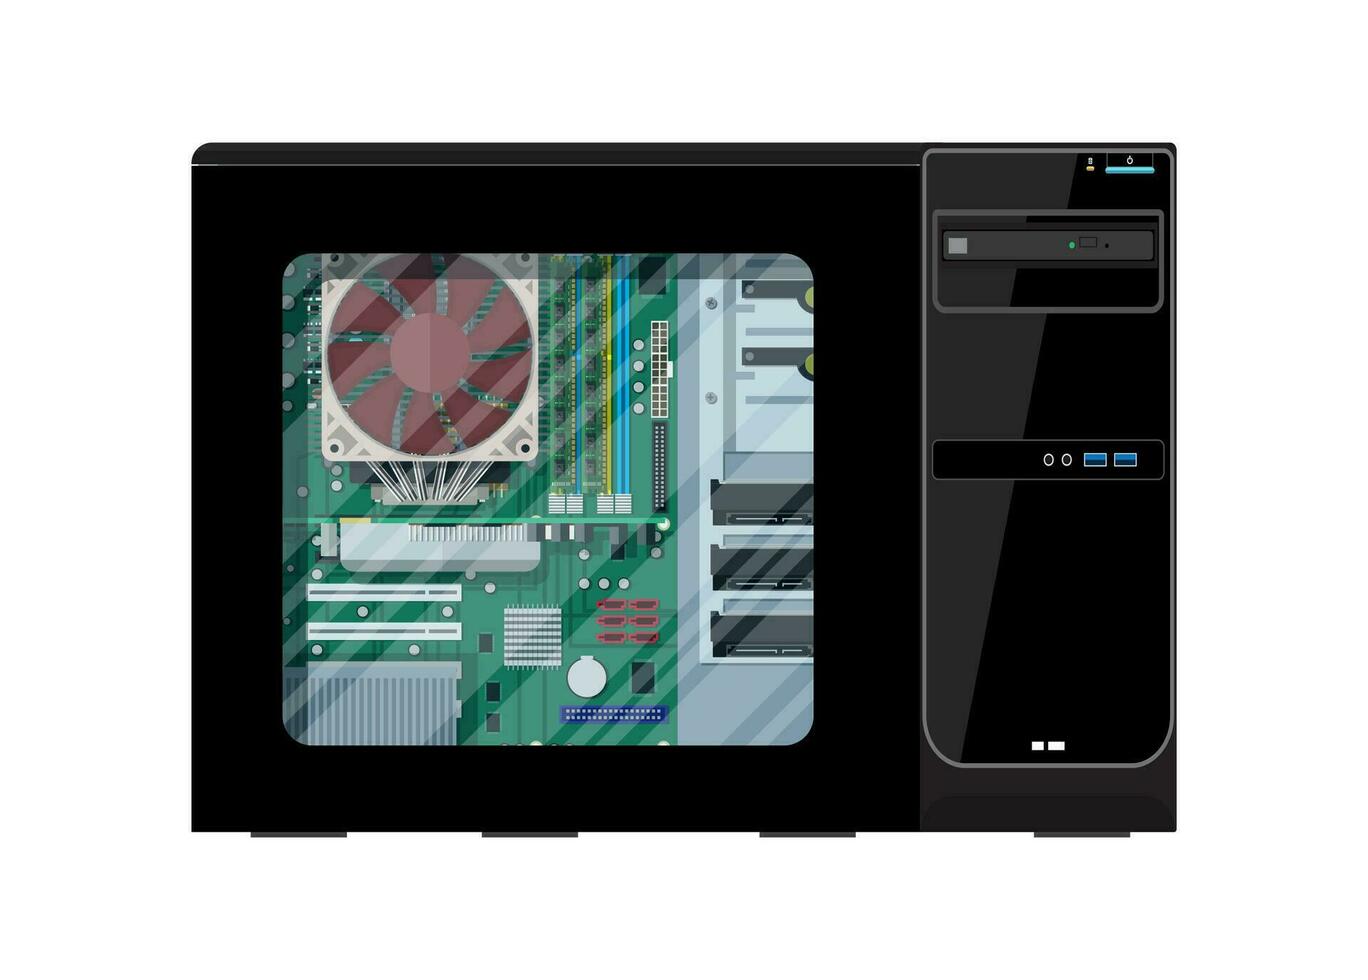 Desktop pc with window. Motherboard, hard drive, cpu, fan, graphic card, memory. Personal computer hardware. PC components inside case. Vector illustration in flat style